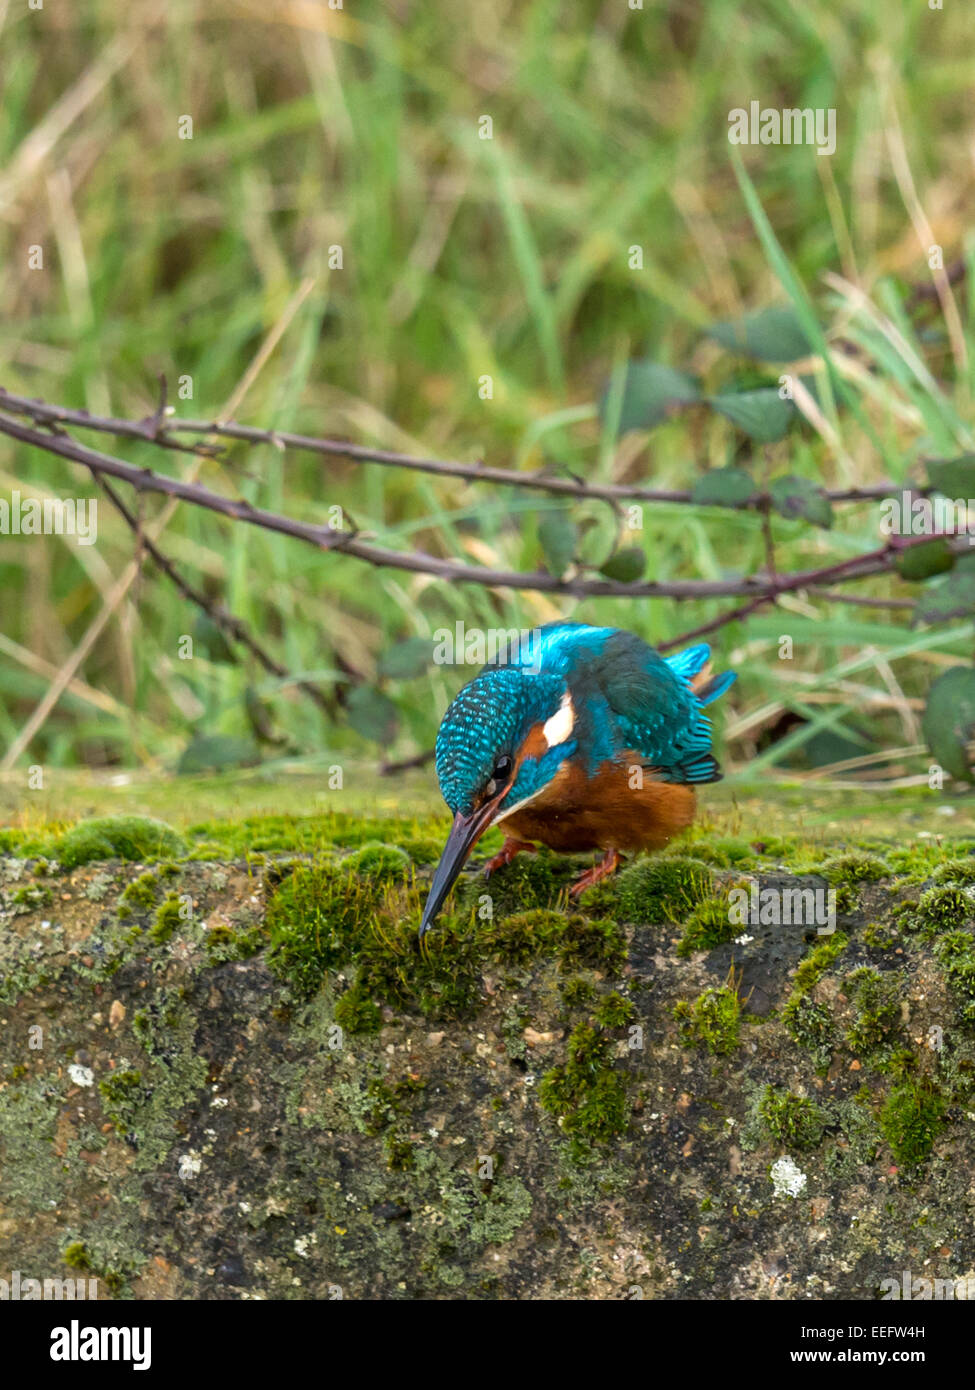 British wildlife, Eurasian Kingfisher [Alcedo atthis] perched on a mossy outcrop Stock Photo